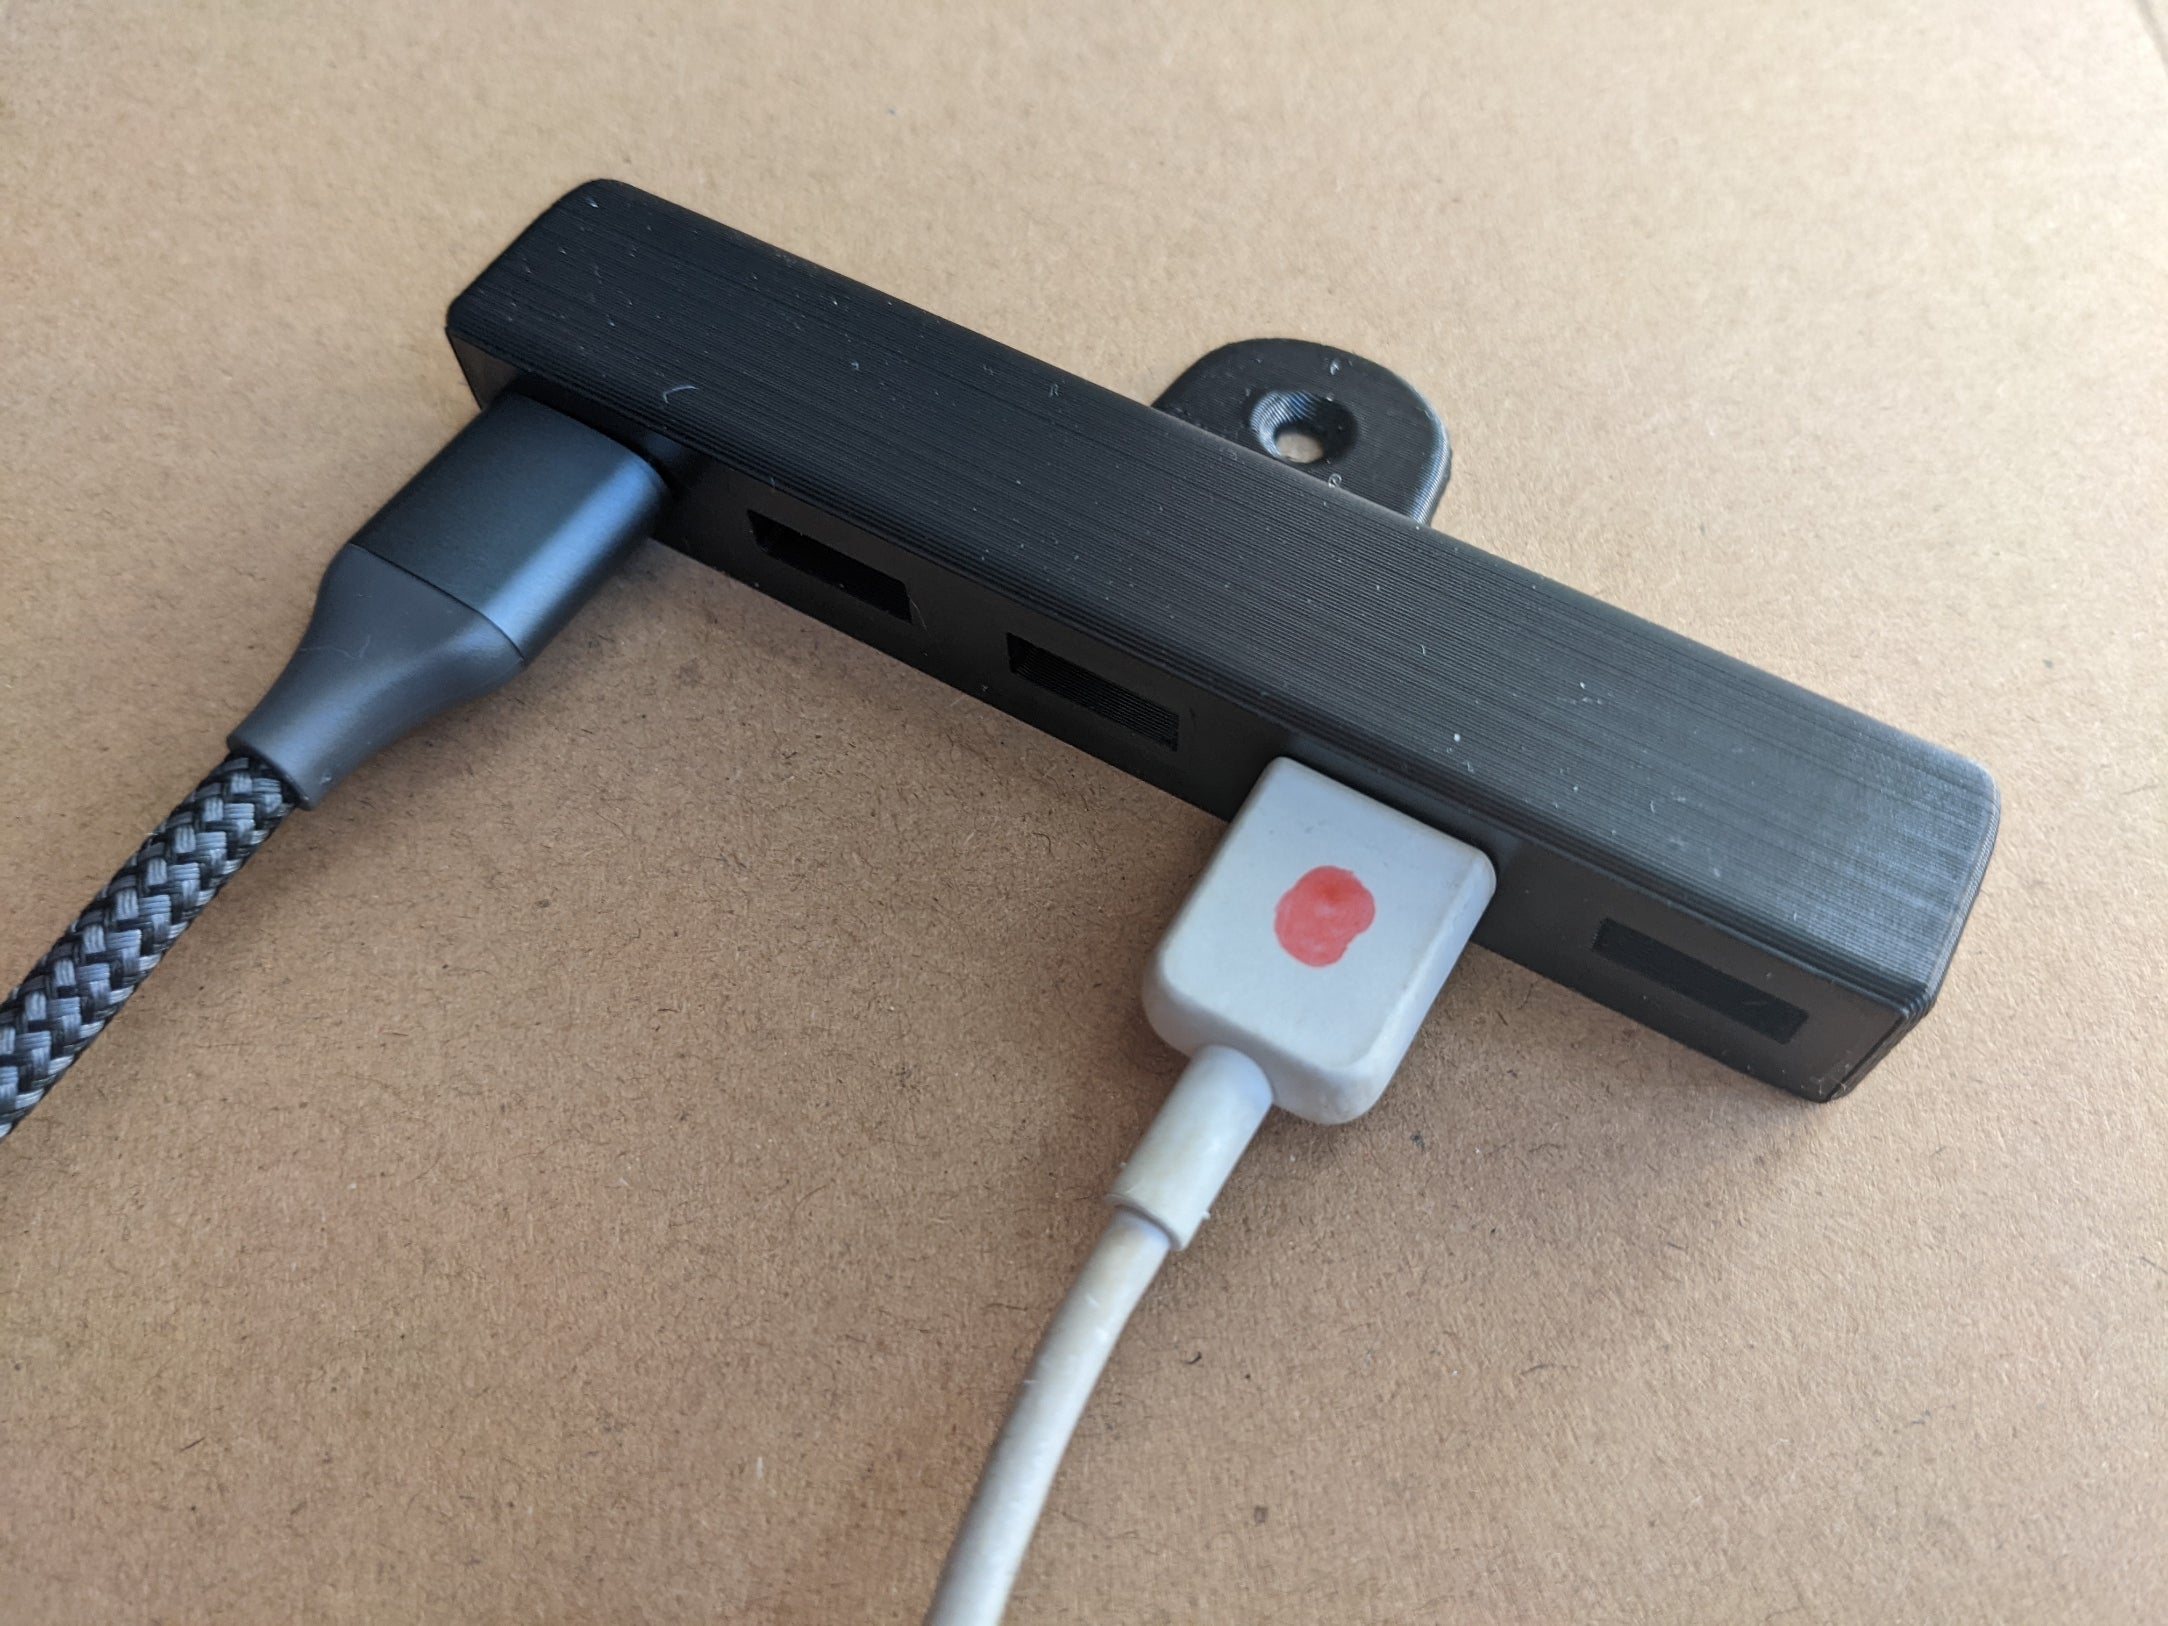 Wall holder for USB cables with 5 slots